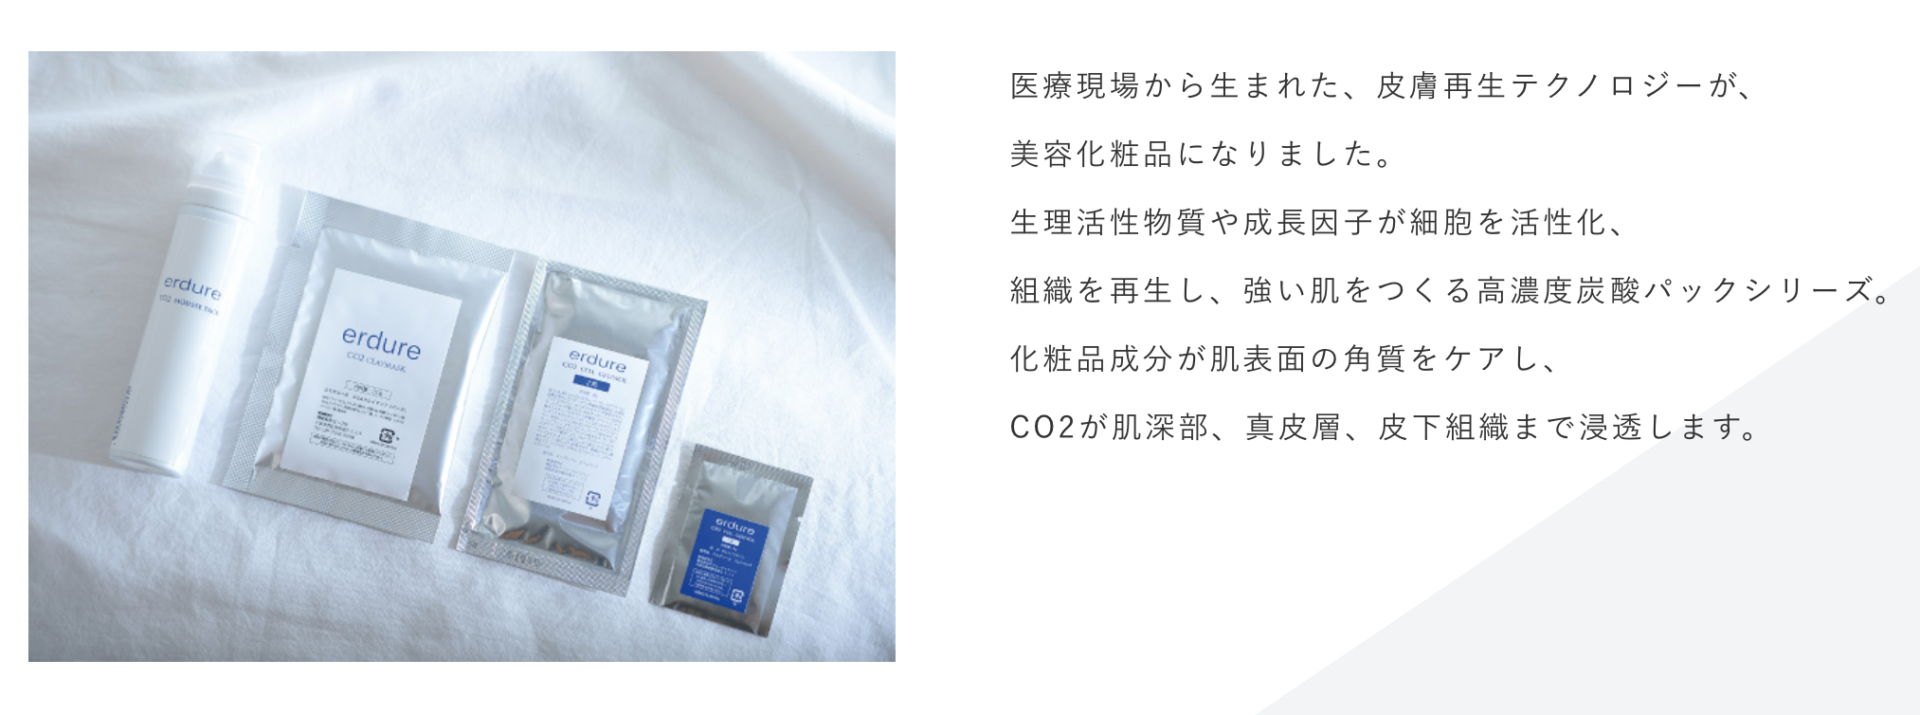 CO2 CELL GELPACK〈エルデュール高濃度炭酸パック〉 – 岡崎市の美容室 